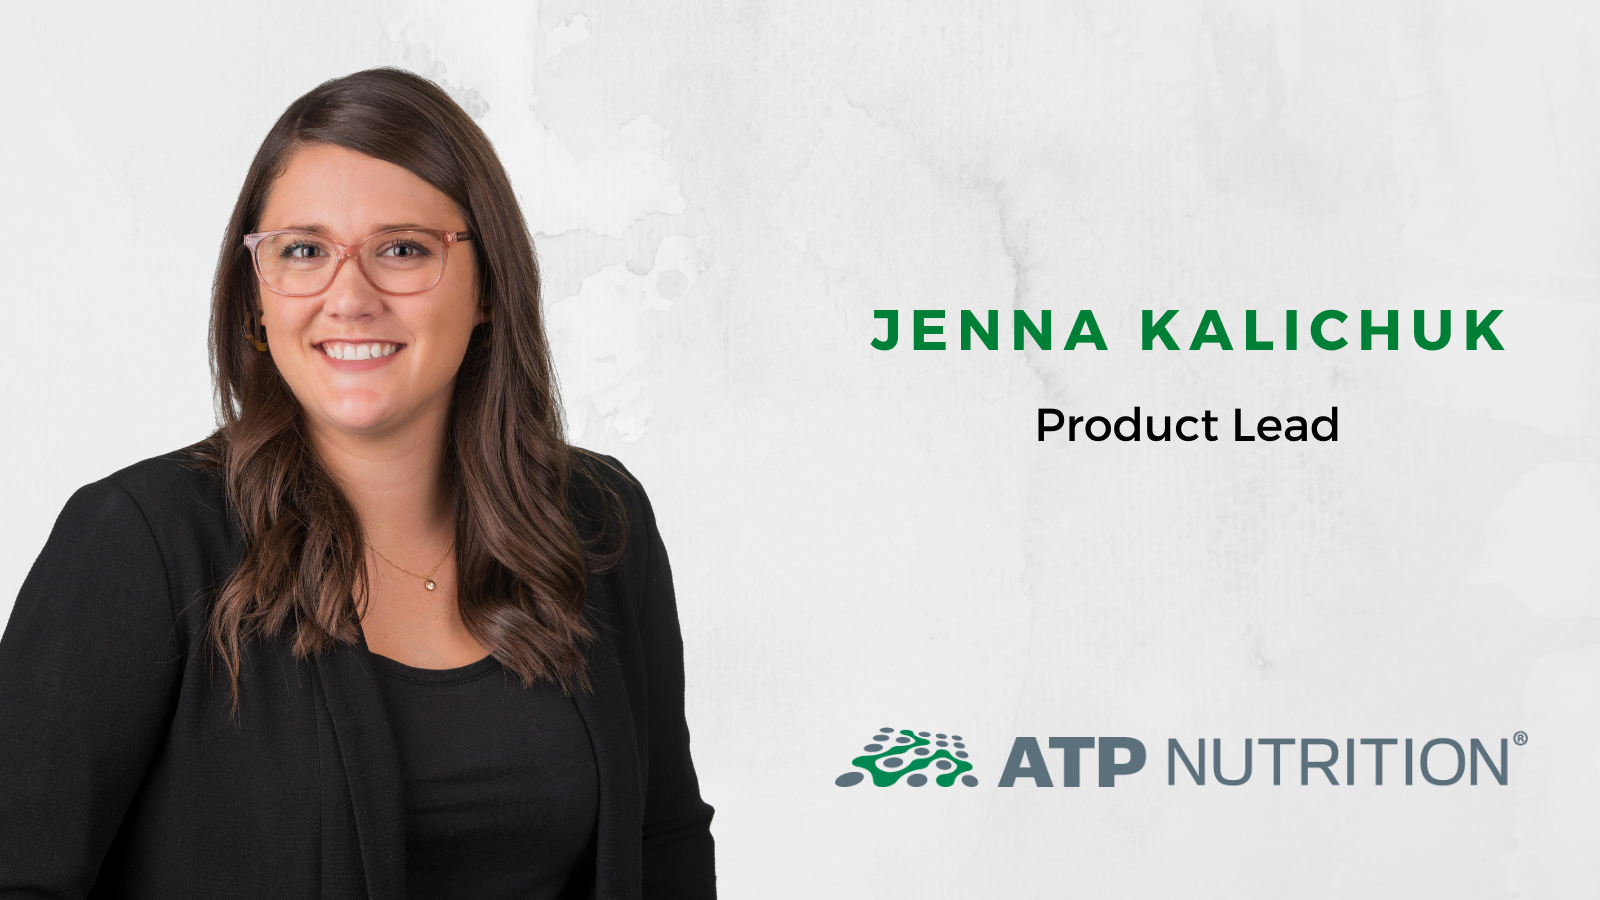 ATP Nutrition welcomes Jenna Kalichuk to the team